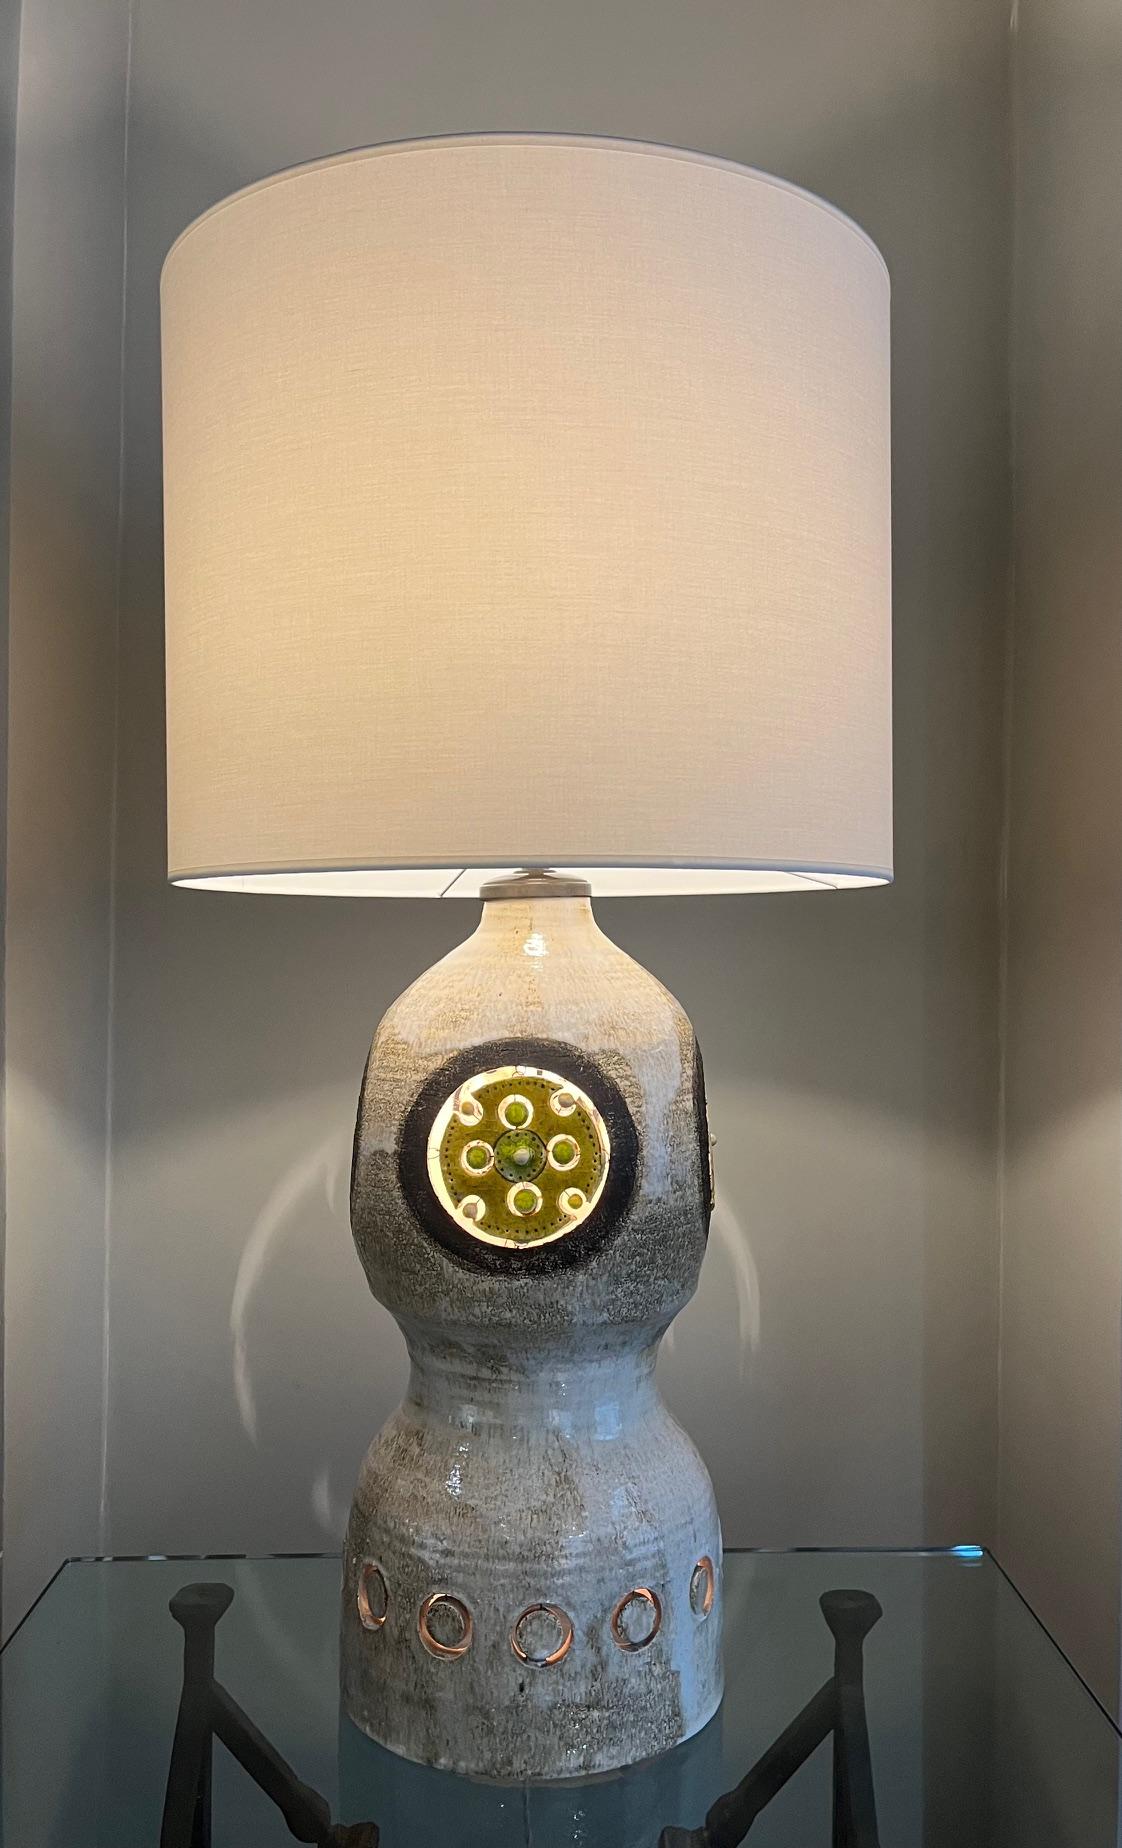  Large ceramic lamp by Georges Pelletier.
Glazed ceramic with openwork on each face in shades of greens
Electrified inside the lamp body.

South of France circa 1970 

 Ceramic Height: 56 cm ( 22 inches)
Total Height: 96 cm ( 37.8  inches ) 
Ceramic